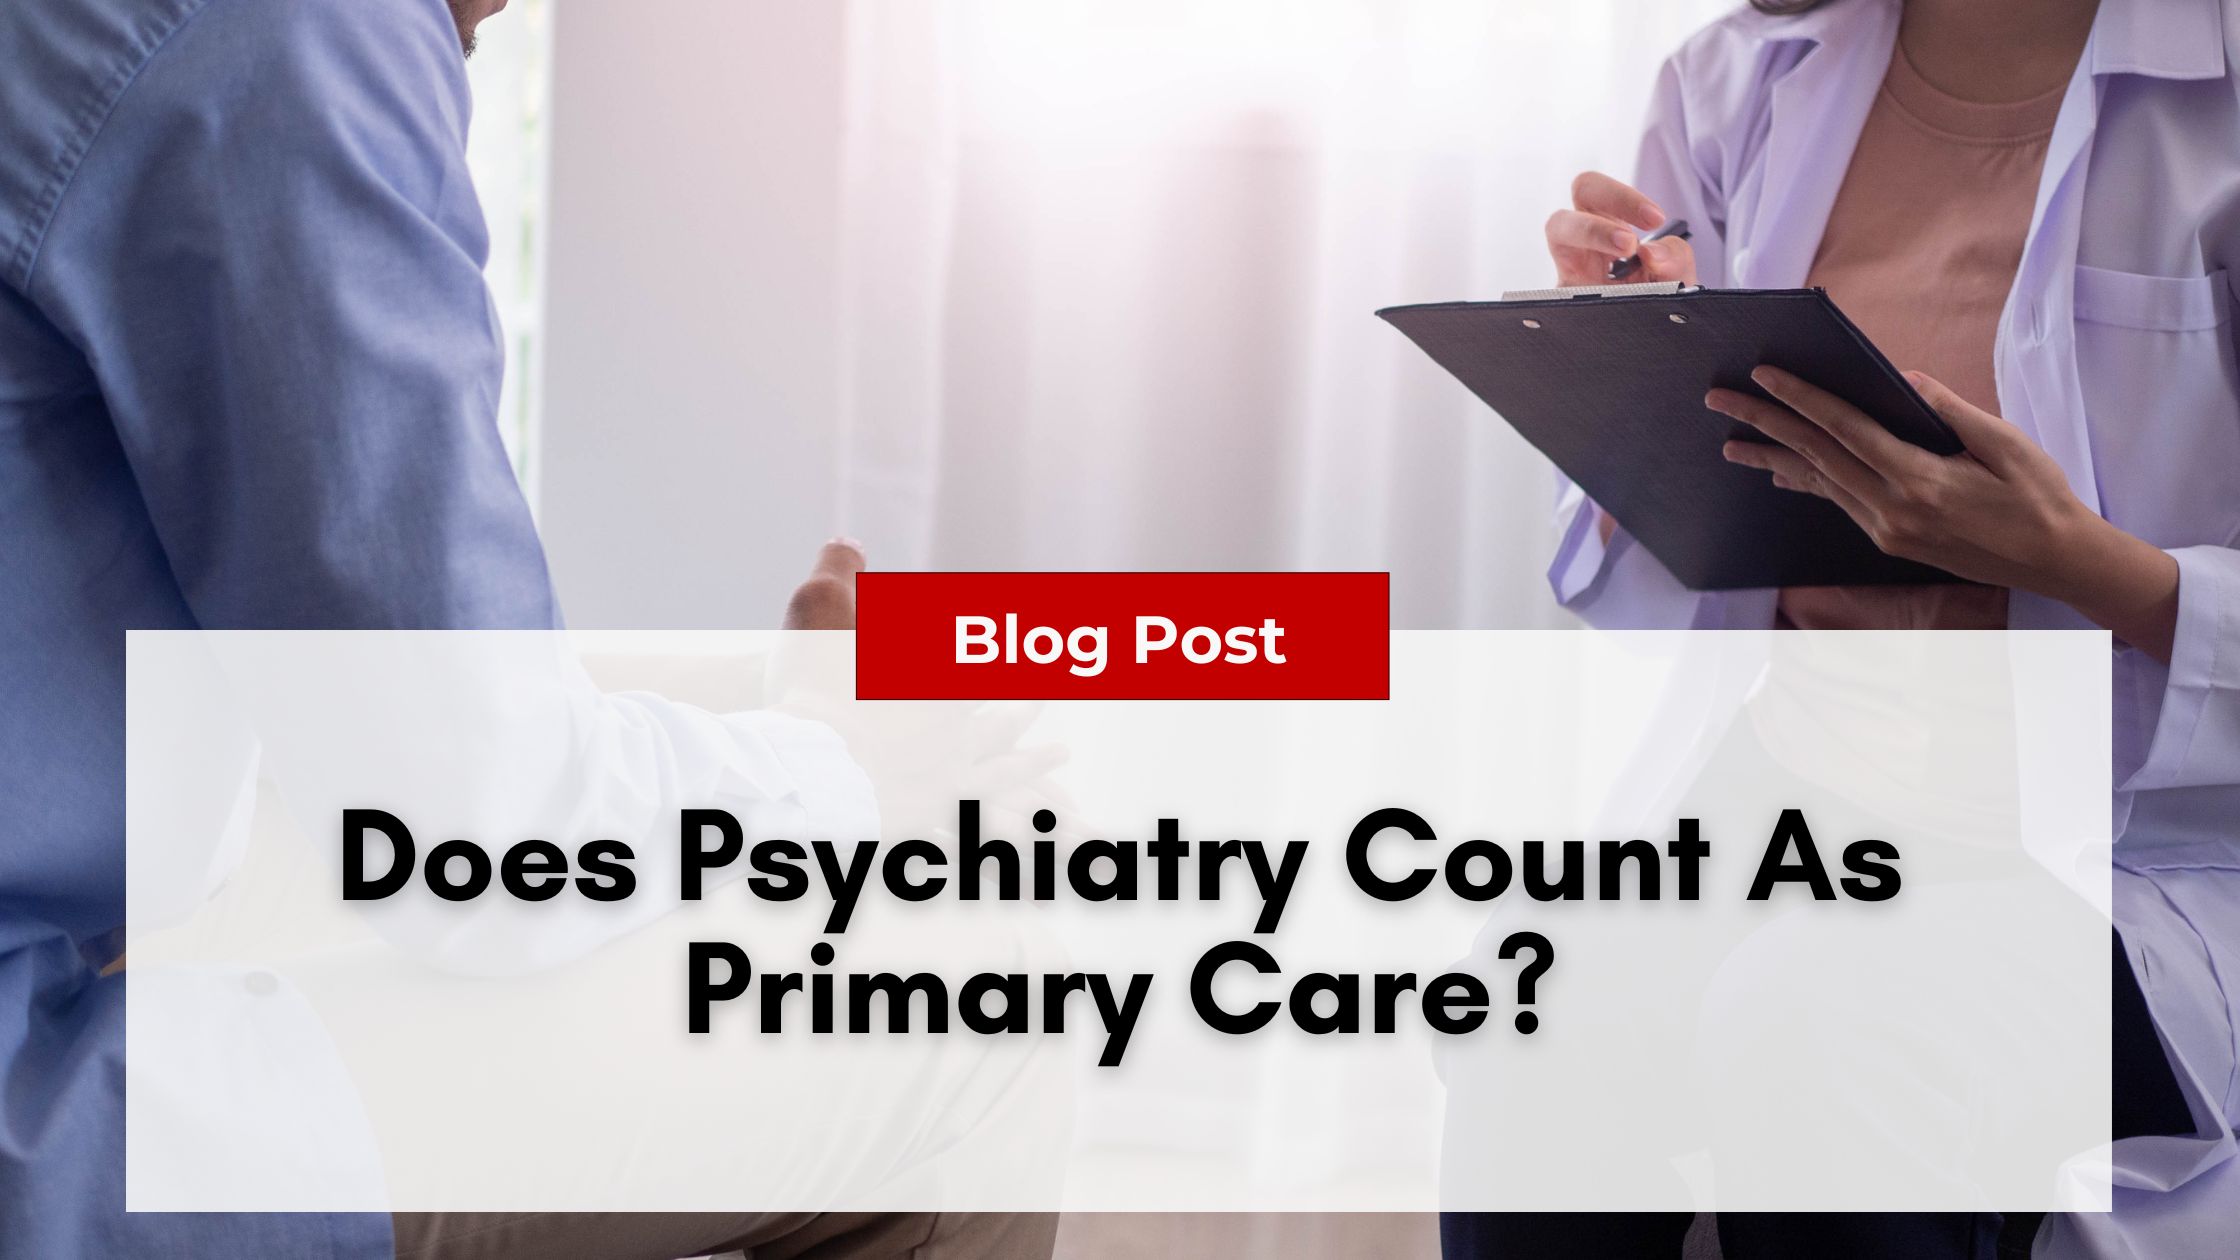 Two individuals are seated and engaging in a discussion. One holds a clipboard. Text overlay reads, "Blog Post: Does Psychiatry Count As Primary Care?" The conversation delves into nurse practitioner burnout and its implications for mental health services.